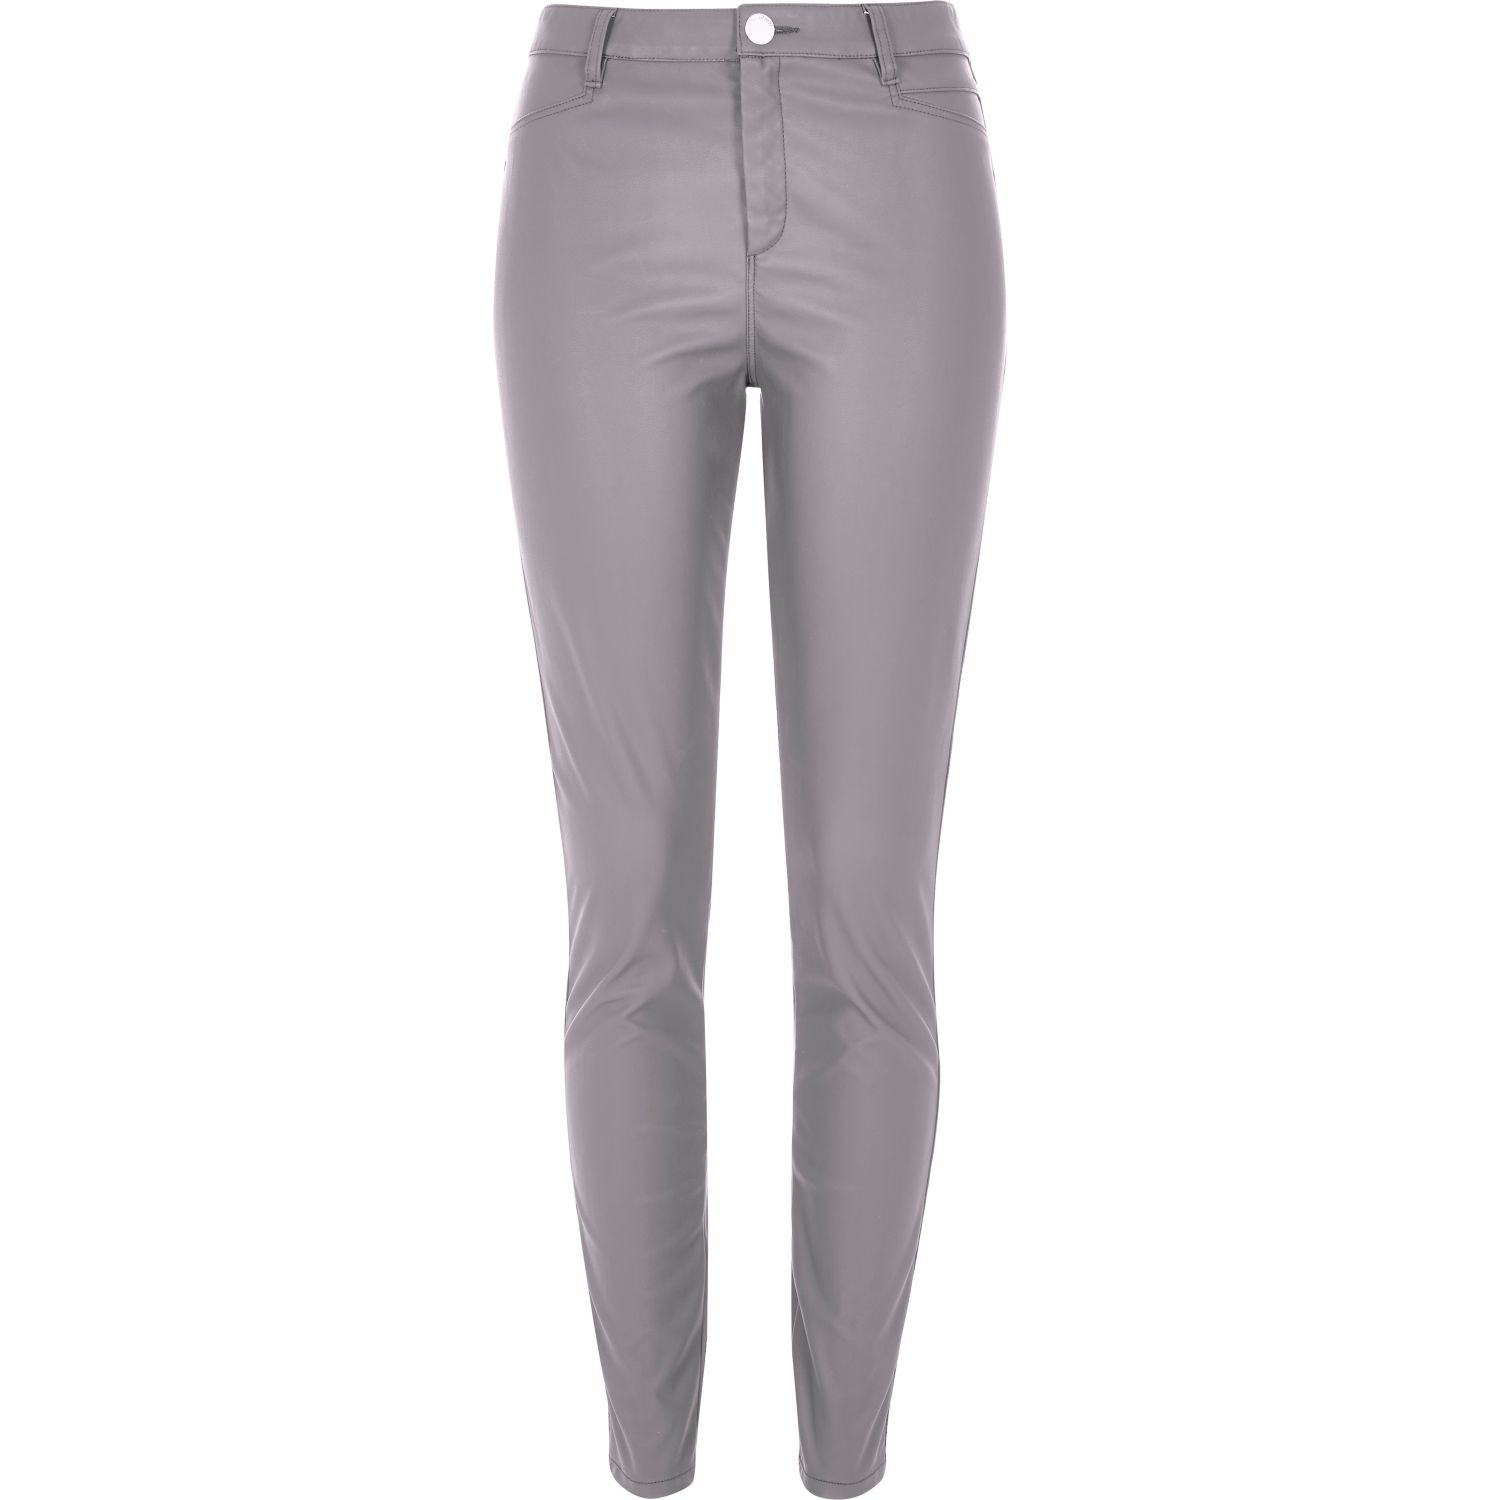 River Island Grey Skinny Leather-look Trousers in Grey - Lyst